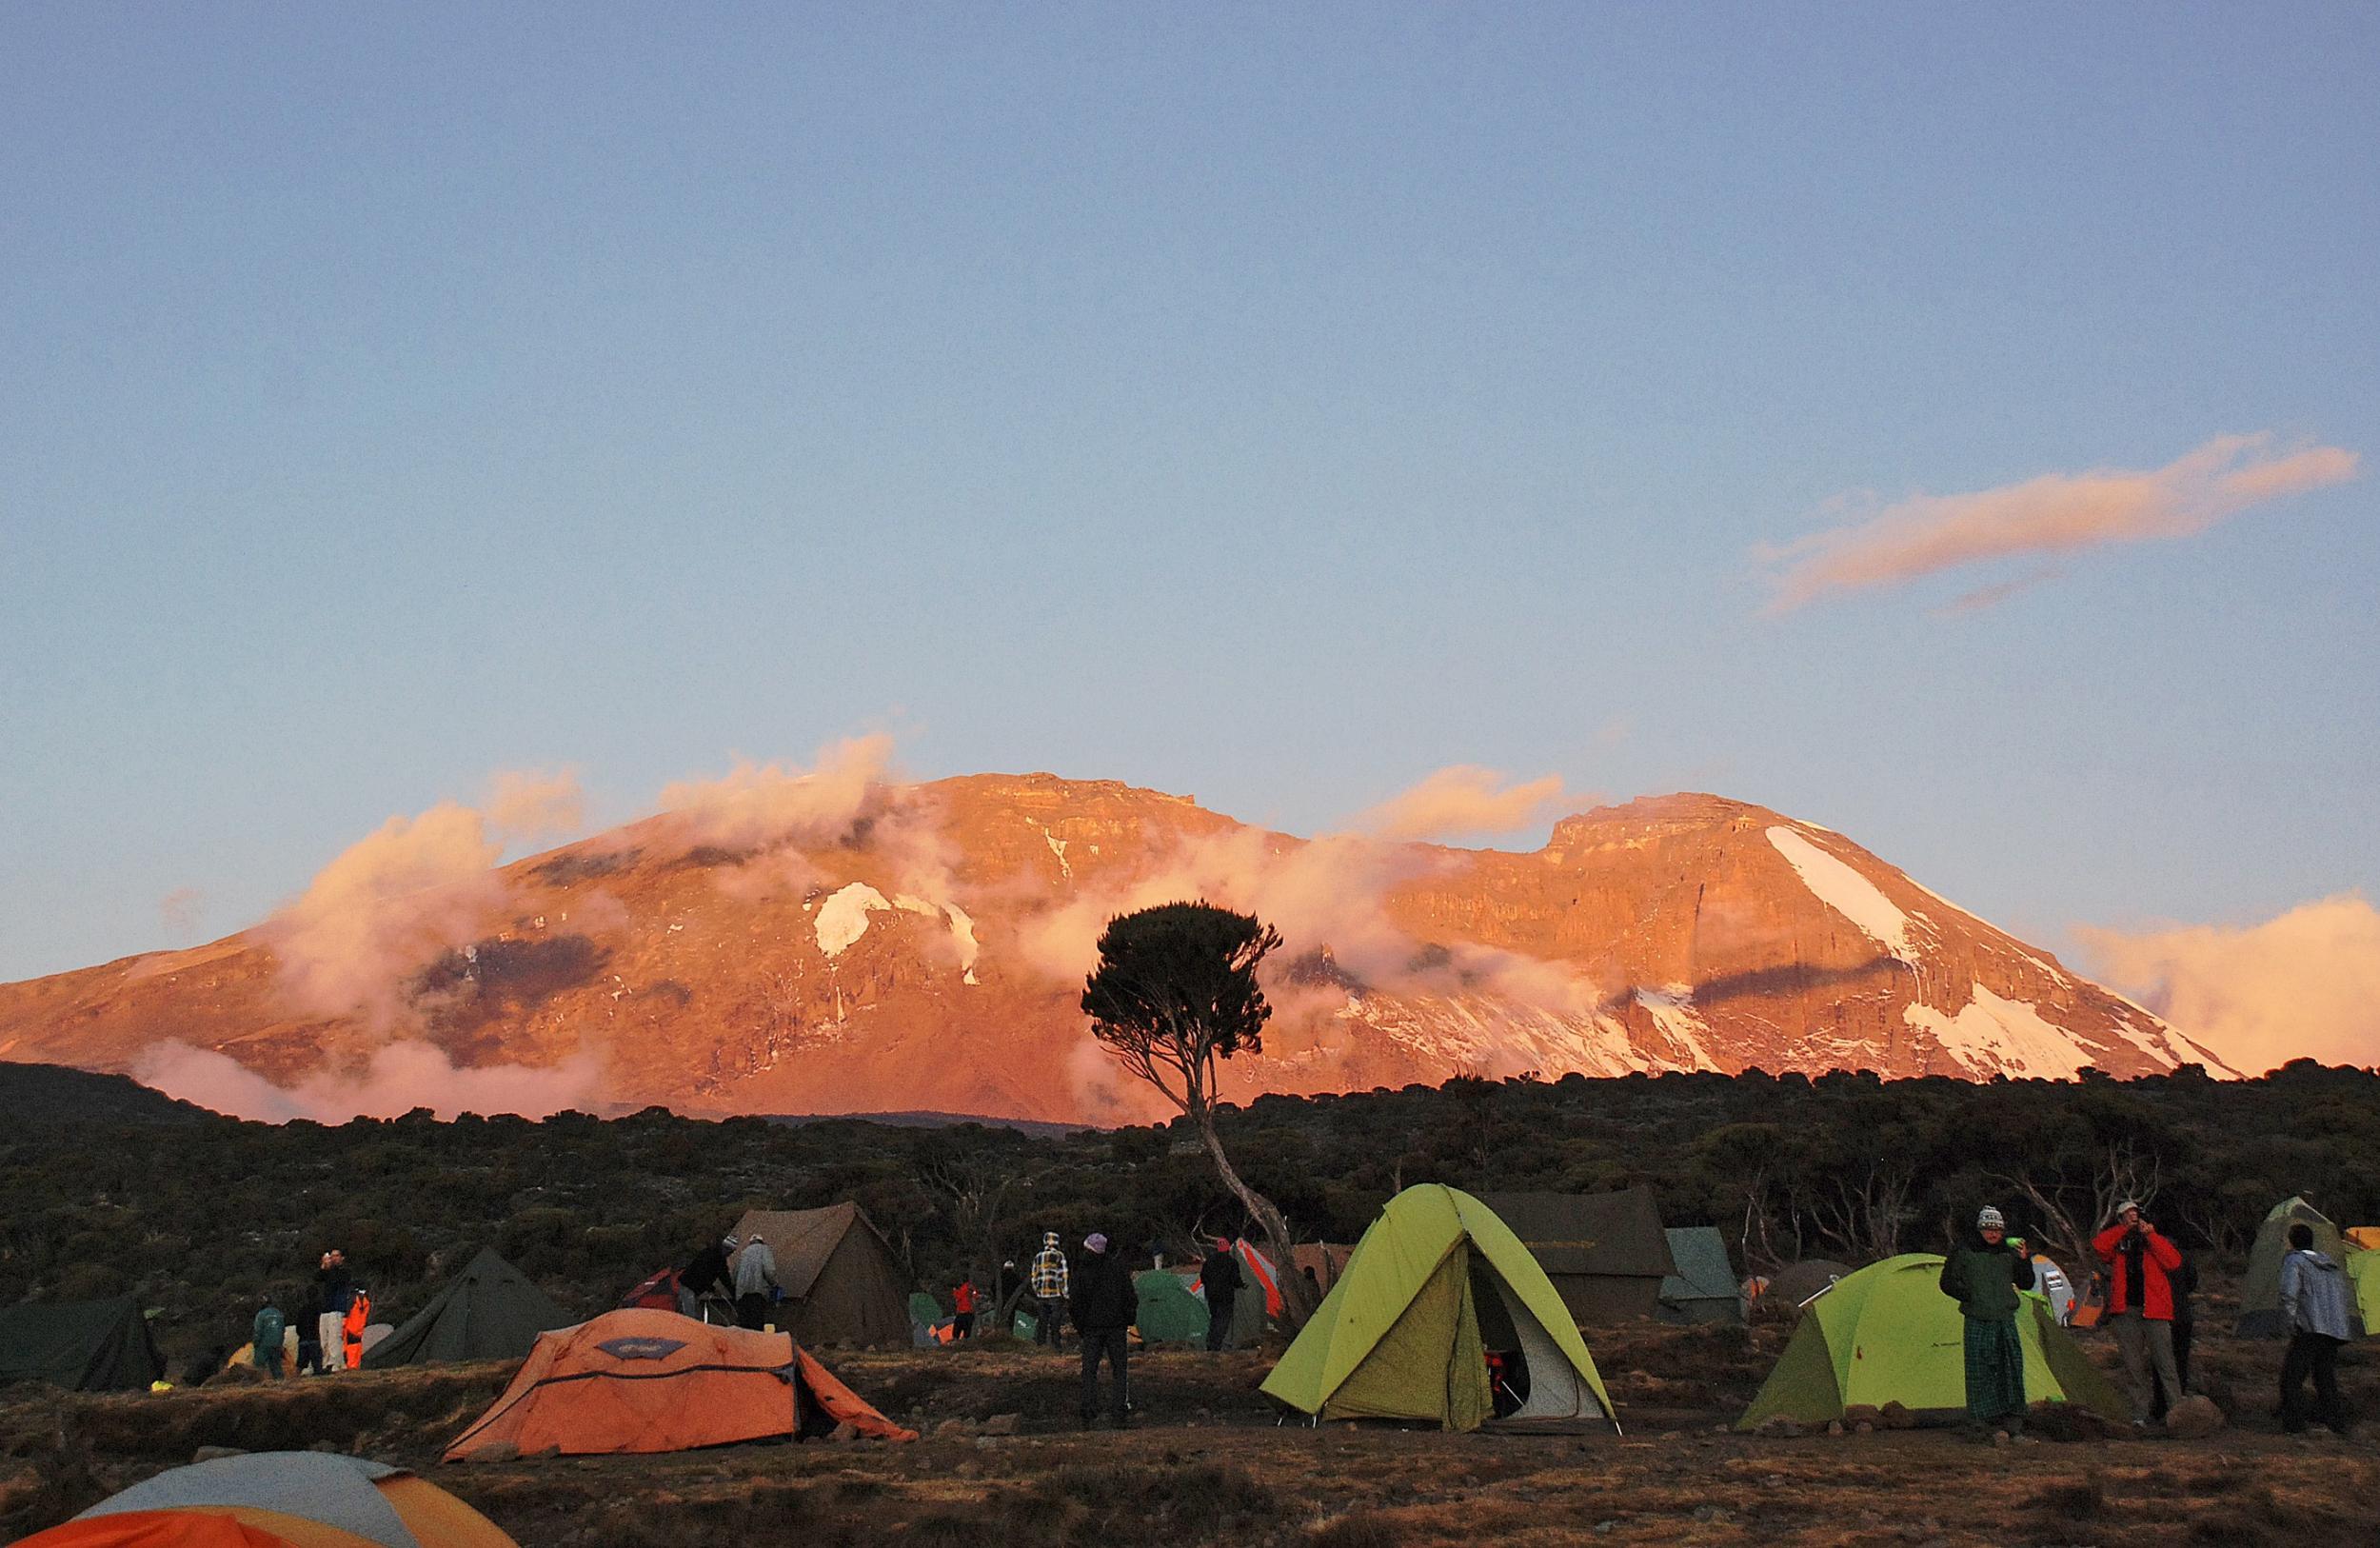 It pays to pack smart for Kili